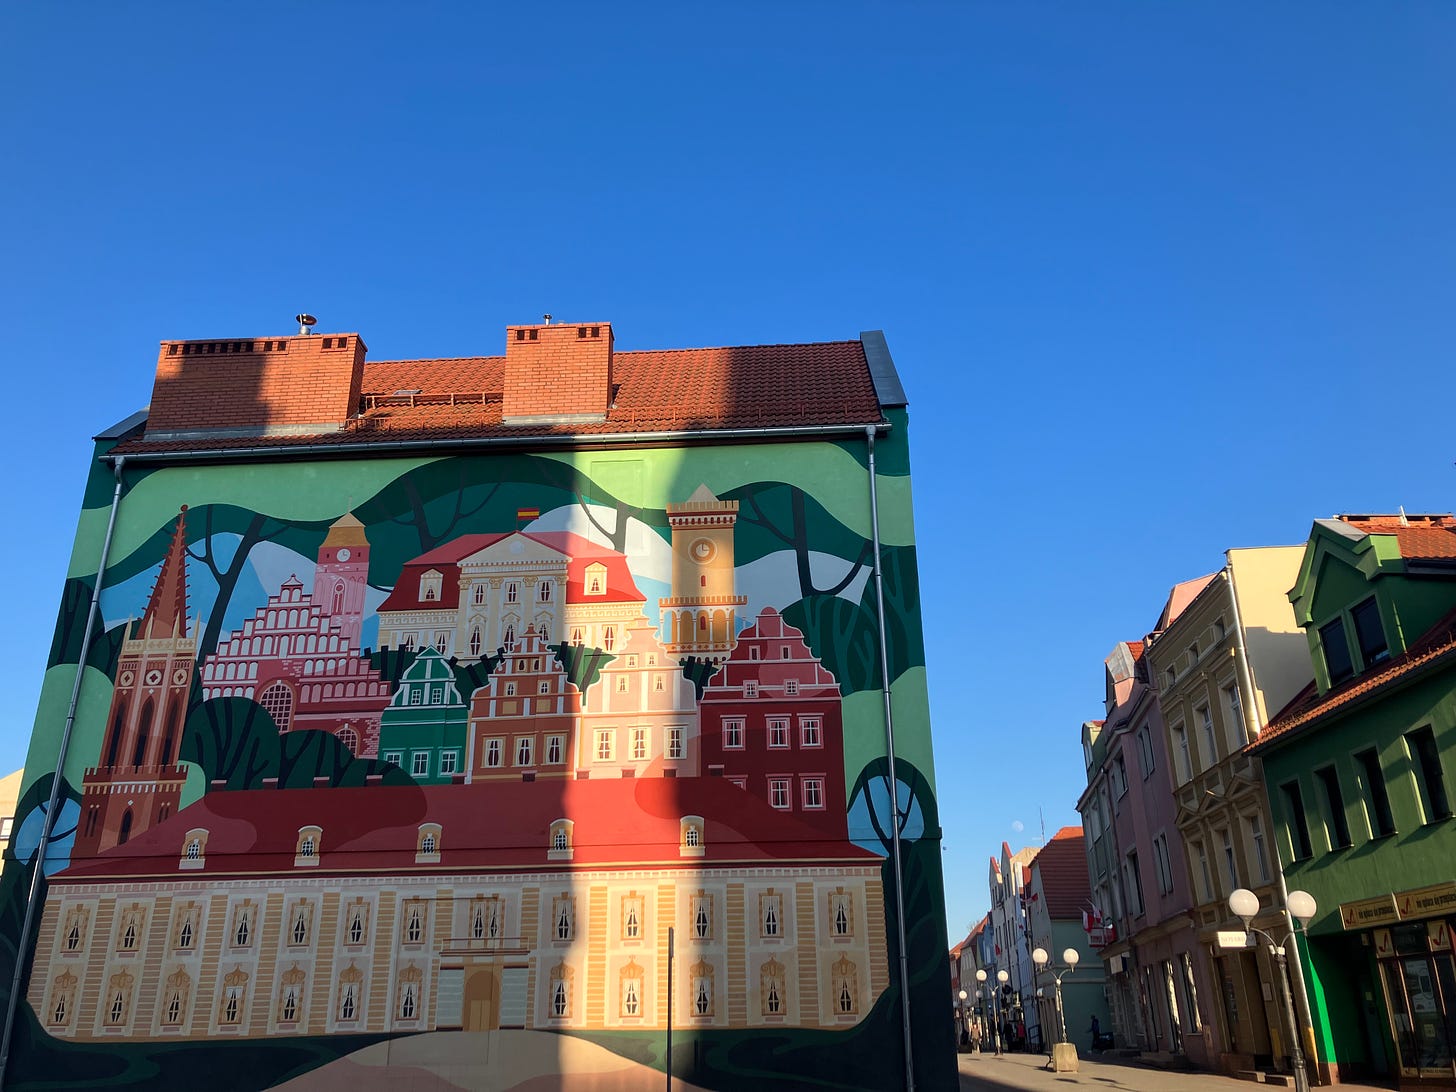 A building with a colourful mural depicting the multicoloured buildings of Zagan on a building in Zagan with some of the colourful buildings across the street.